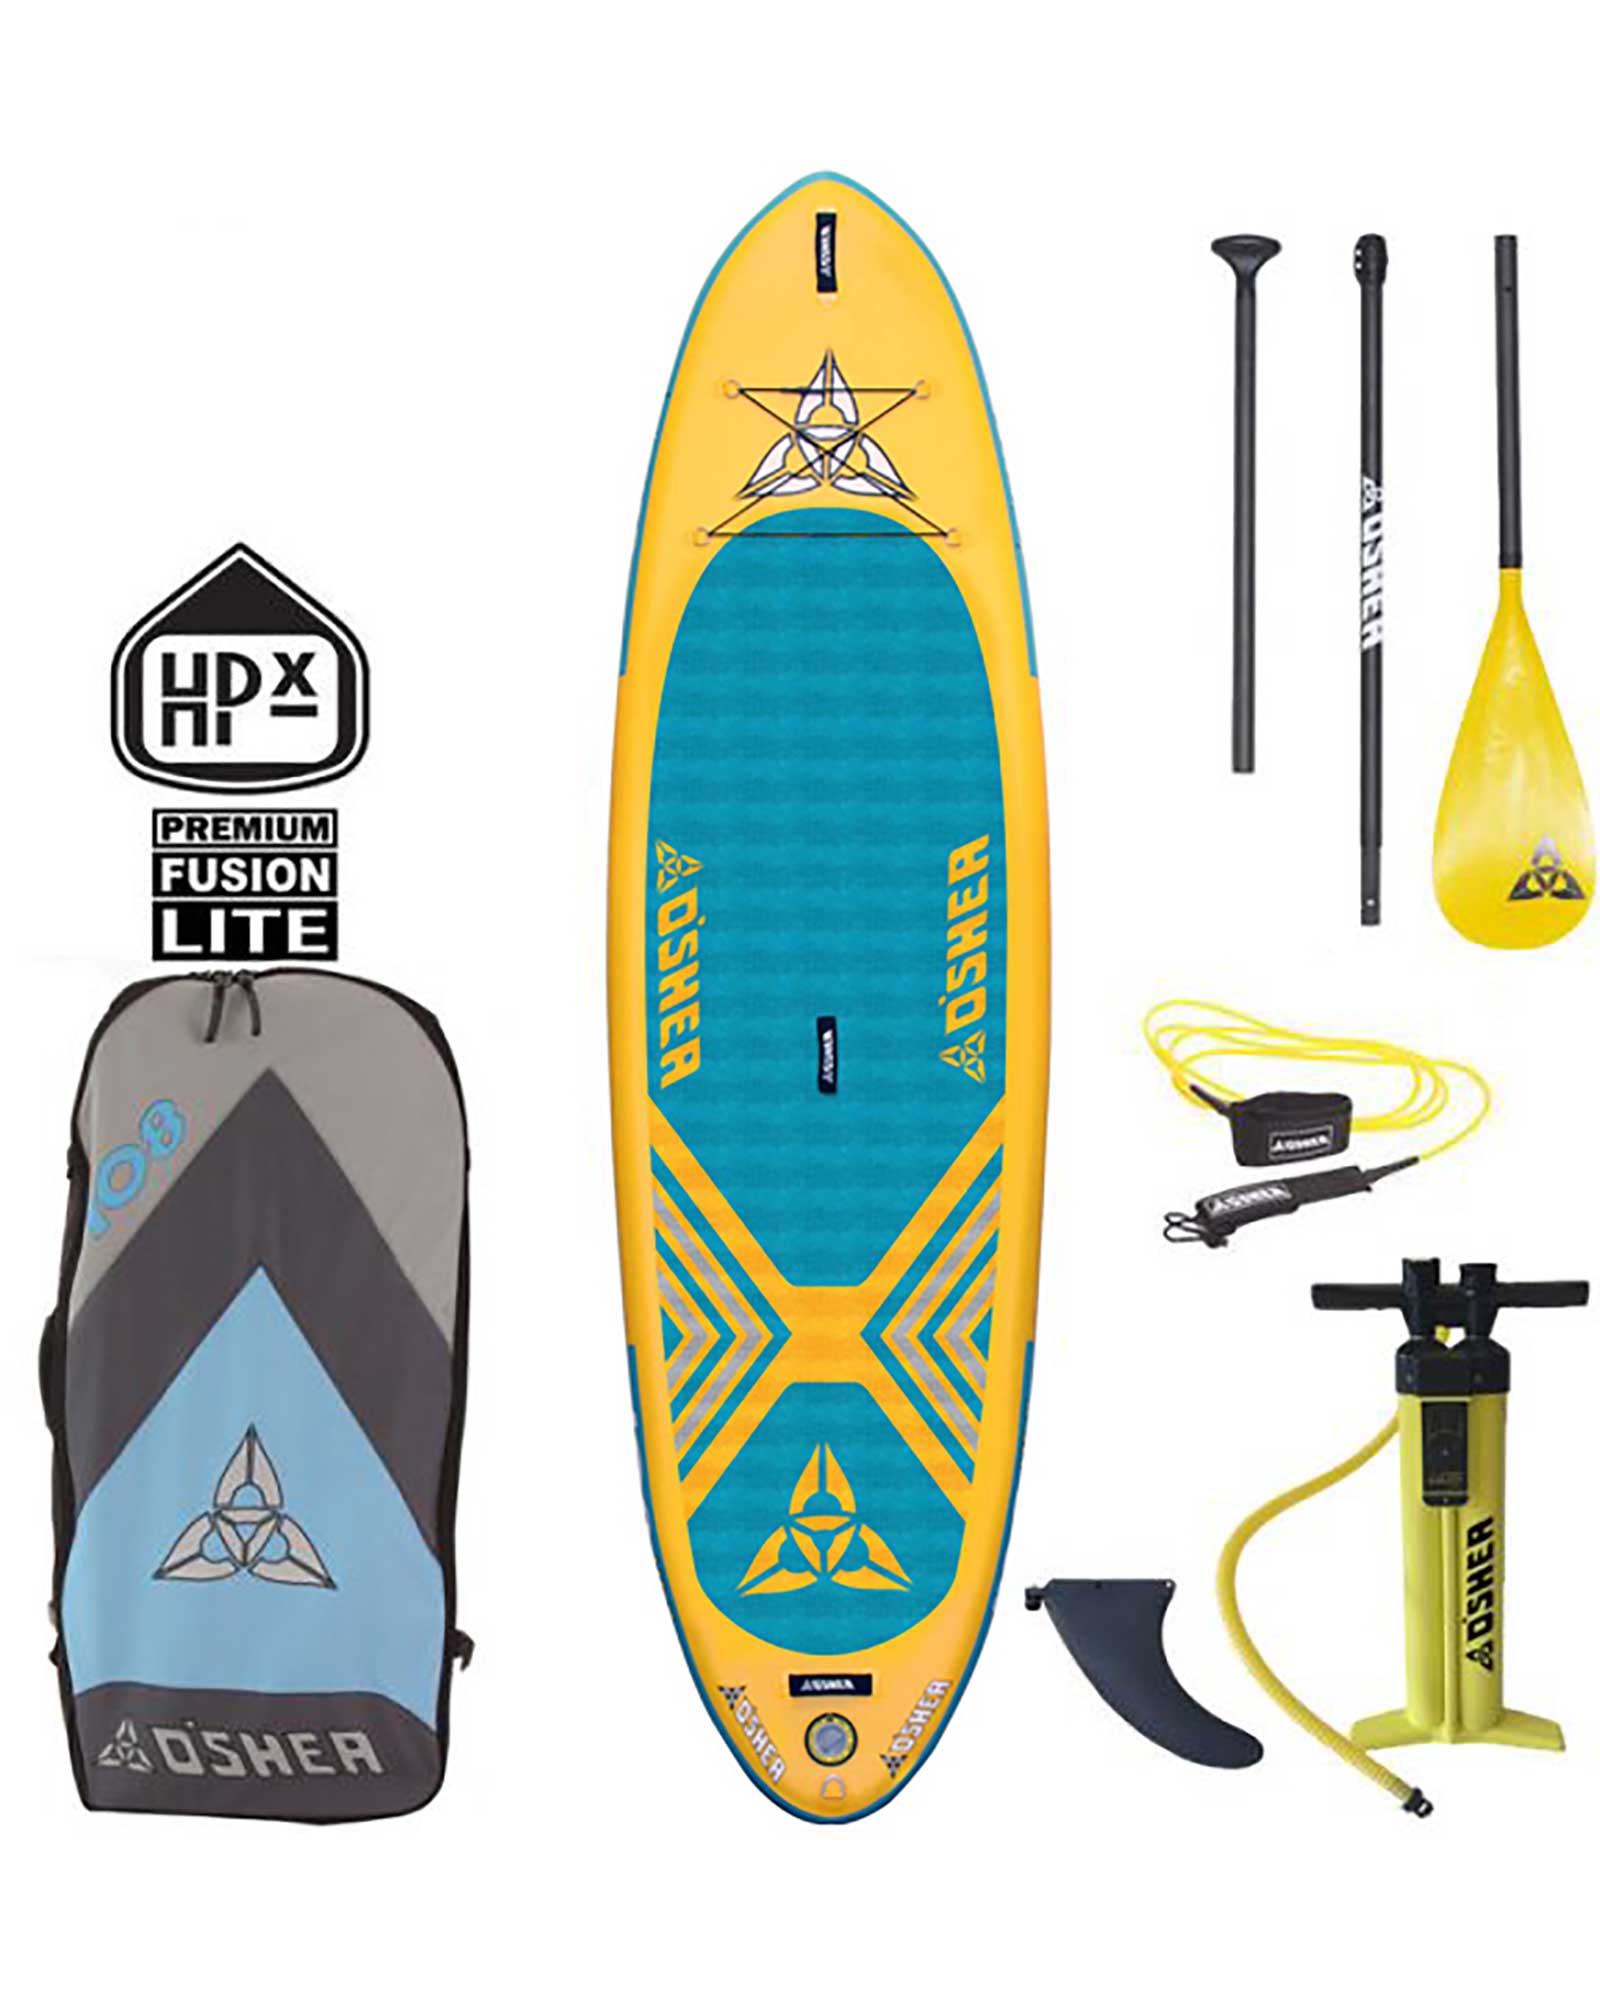 O'Shea HPx 10'8 Inflatable Stand-Up Paddleboard Package